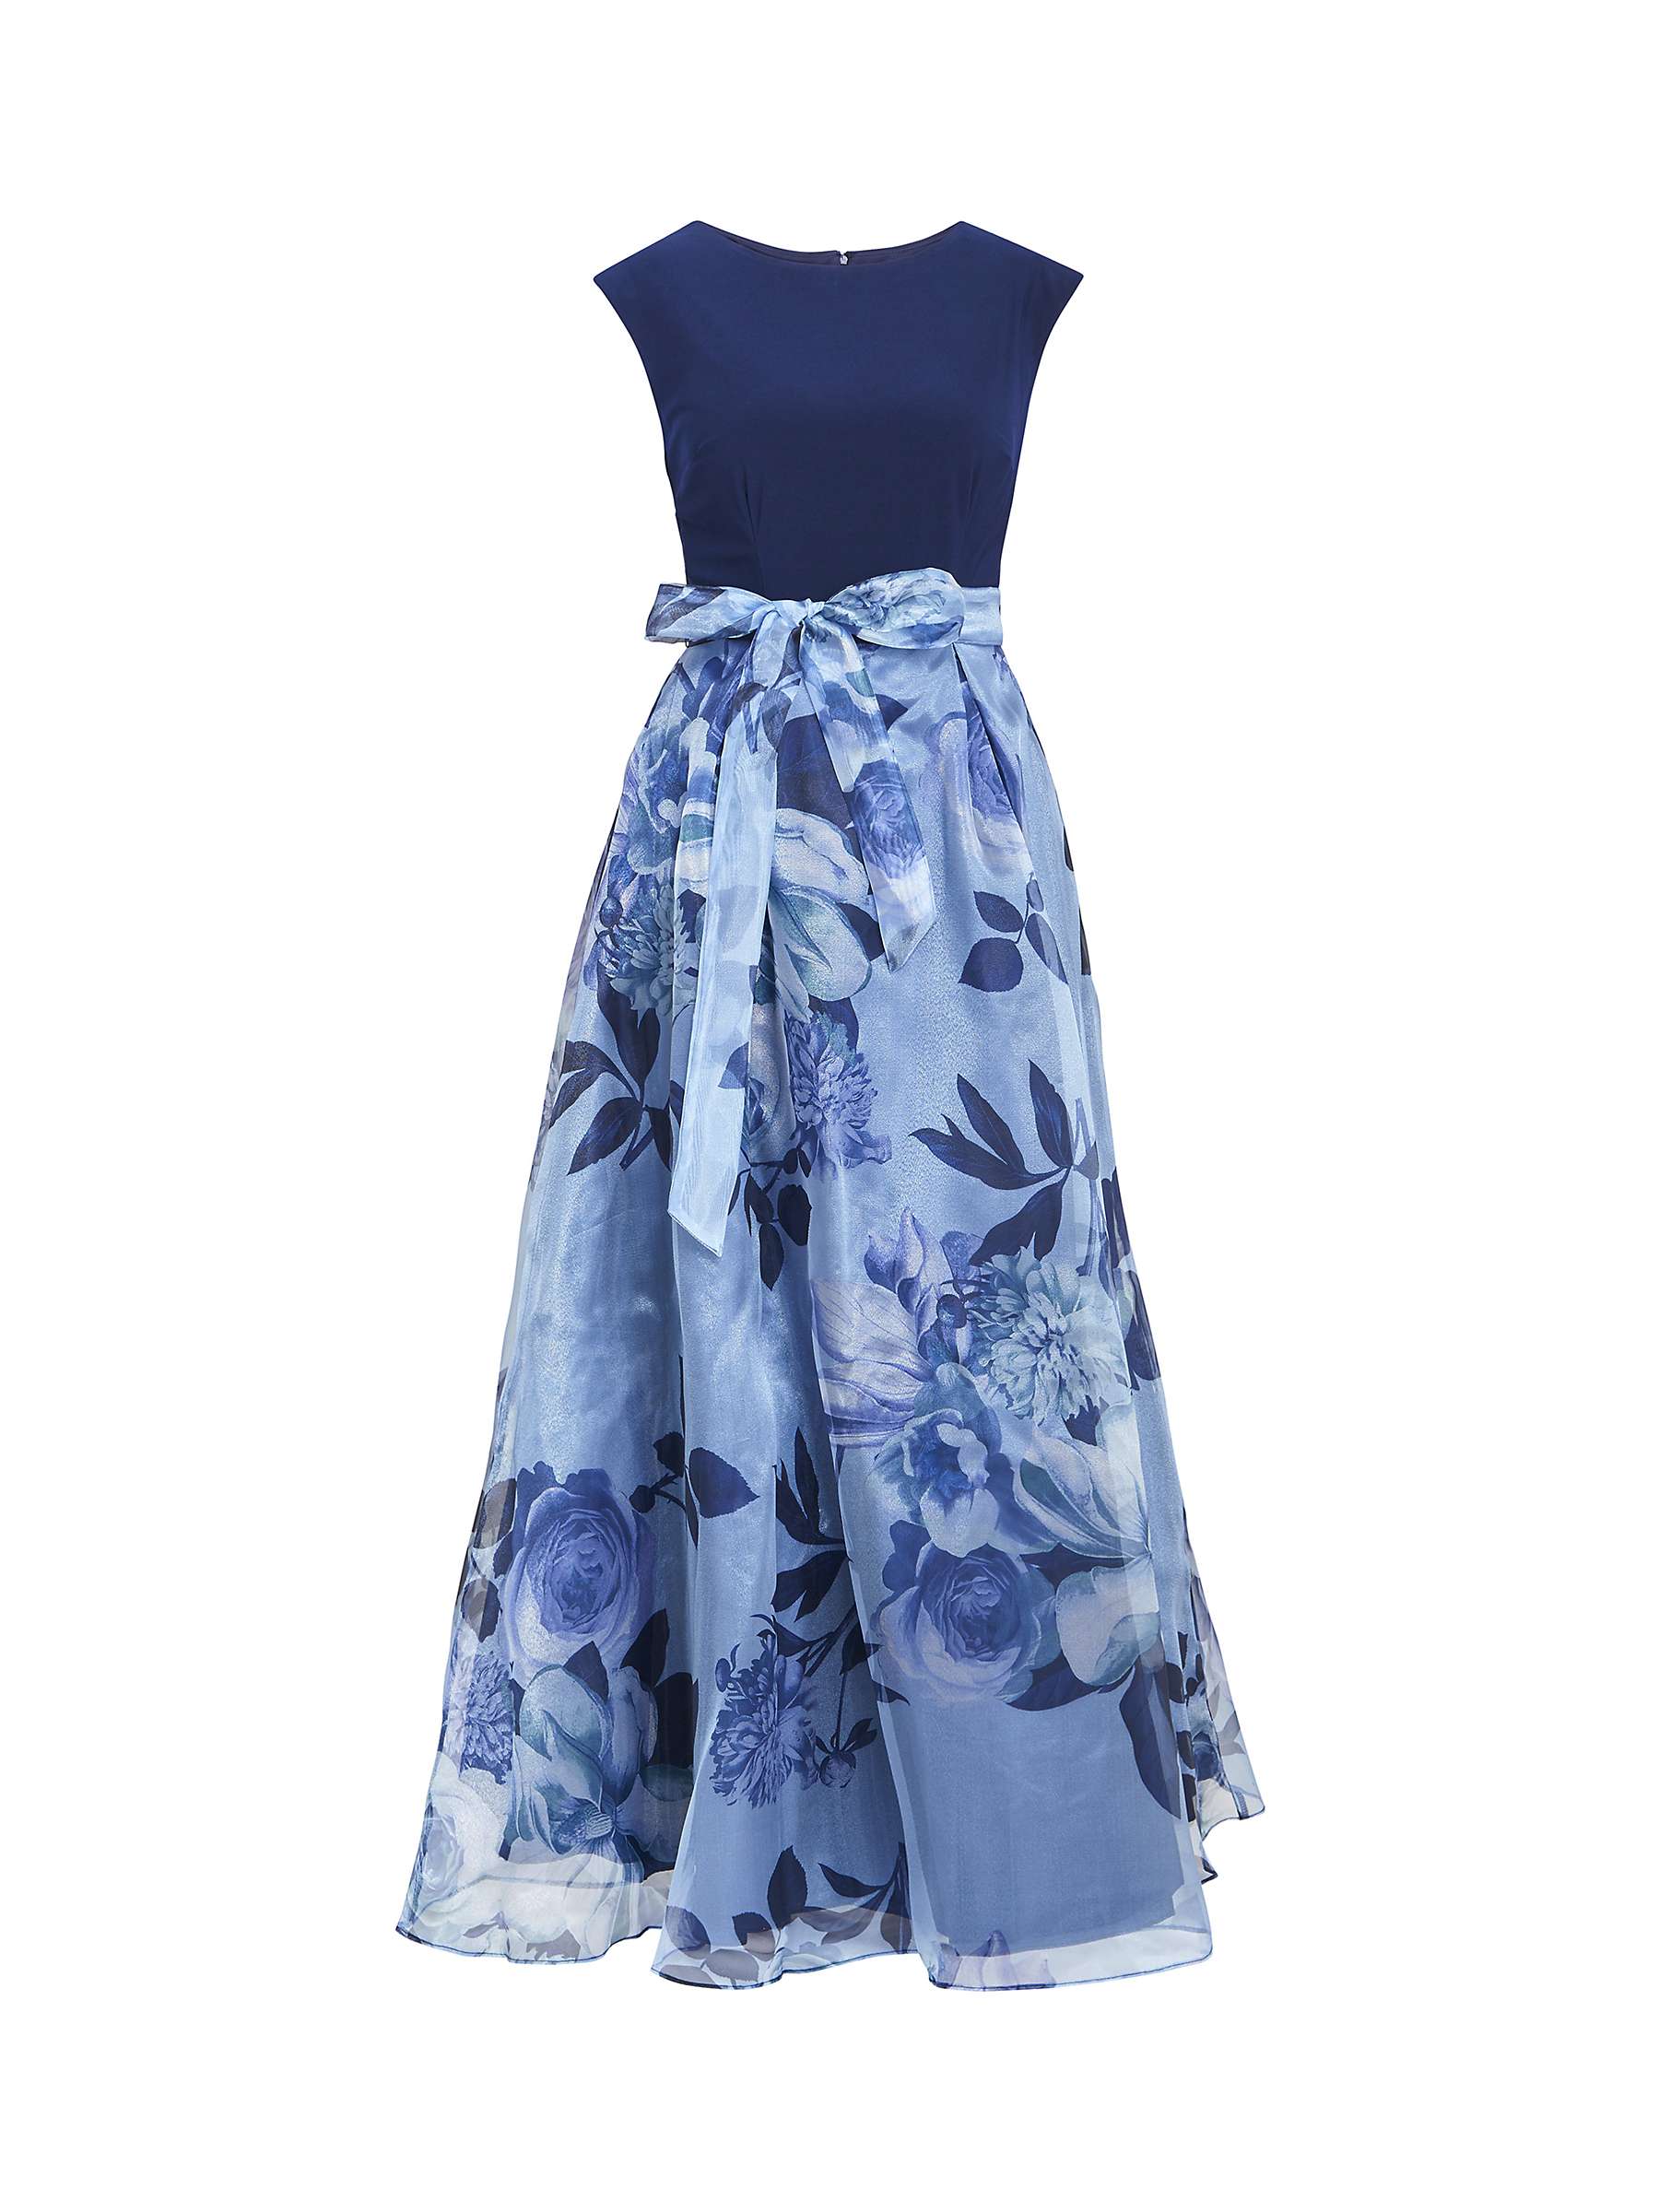 Buy Gina Bacconi Grace Maxi Printed Dress With Jersey Bodice Belt, Navy/Multi Online at johnlewis.com